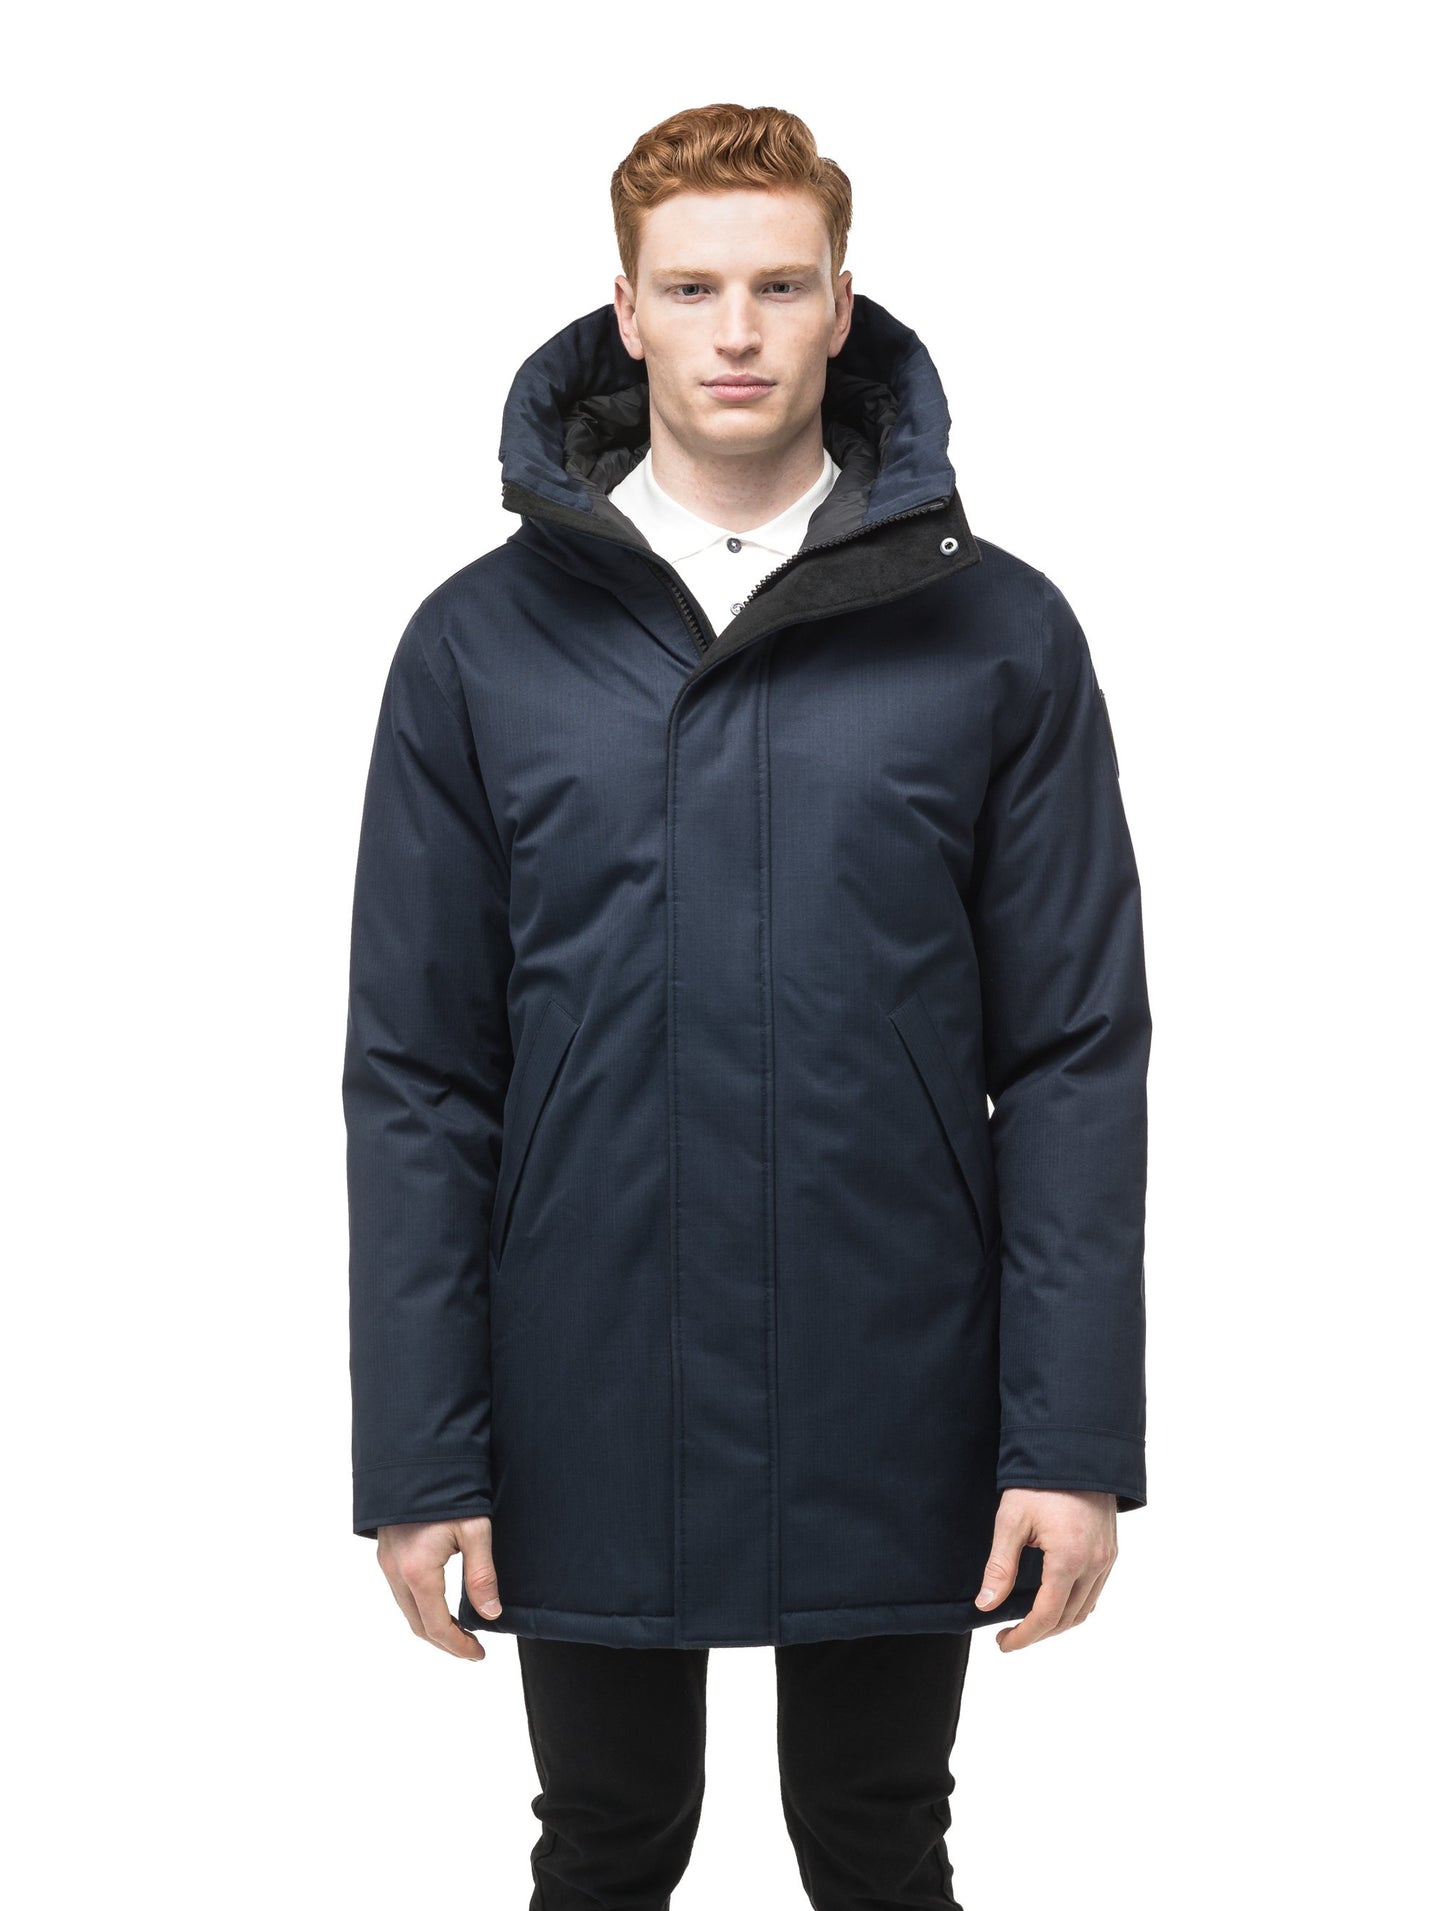 Pierre Men's Jacket in thigh length, Canadian white duck down insulation, non-removable down-filled hood, angled waist pockets, centre-front zipper with wind flap, and elastic ribbed cuffs, in CH Navy